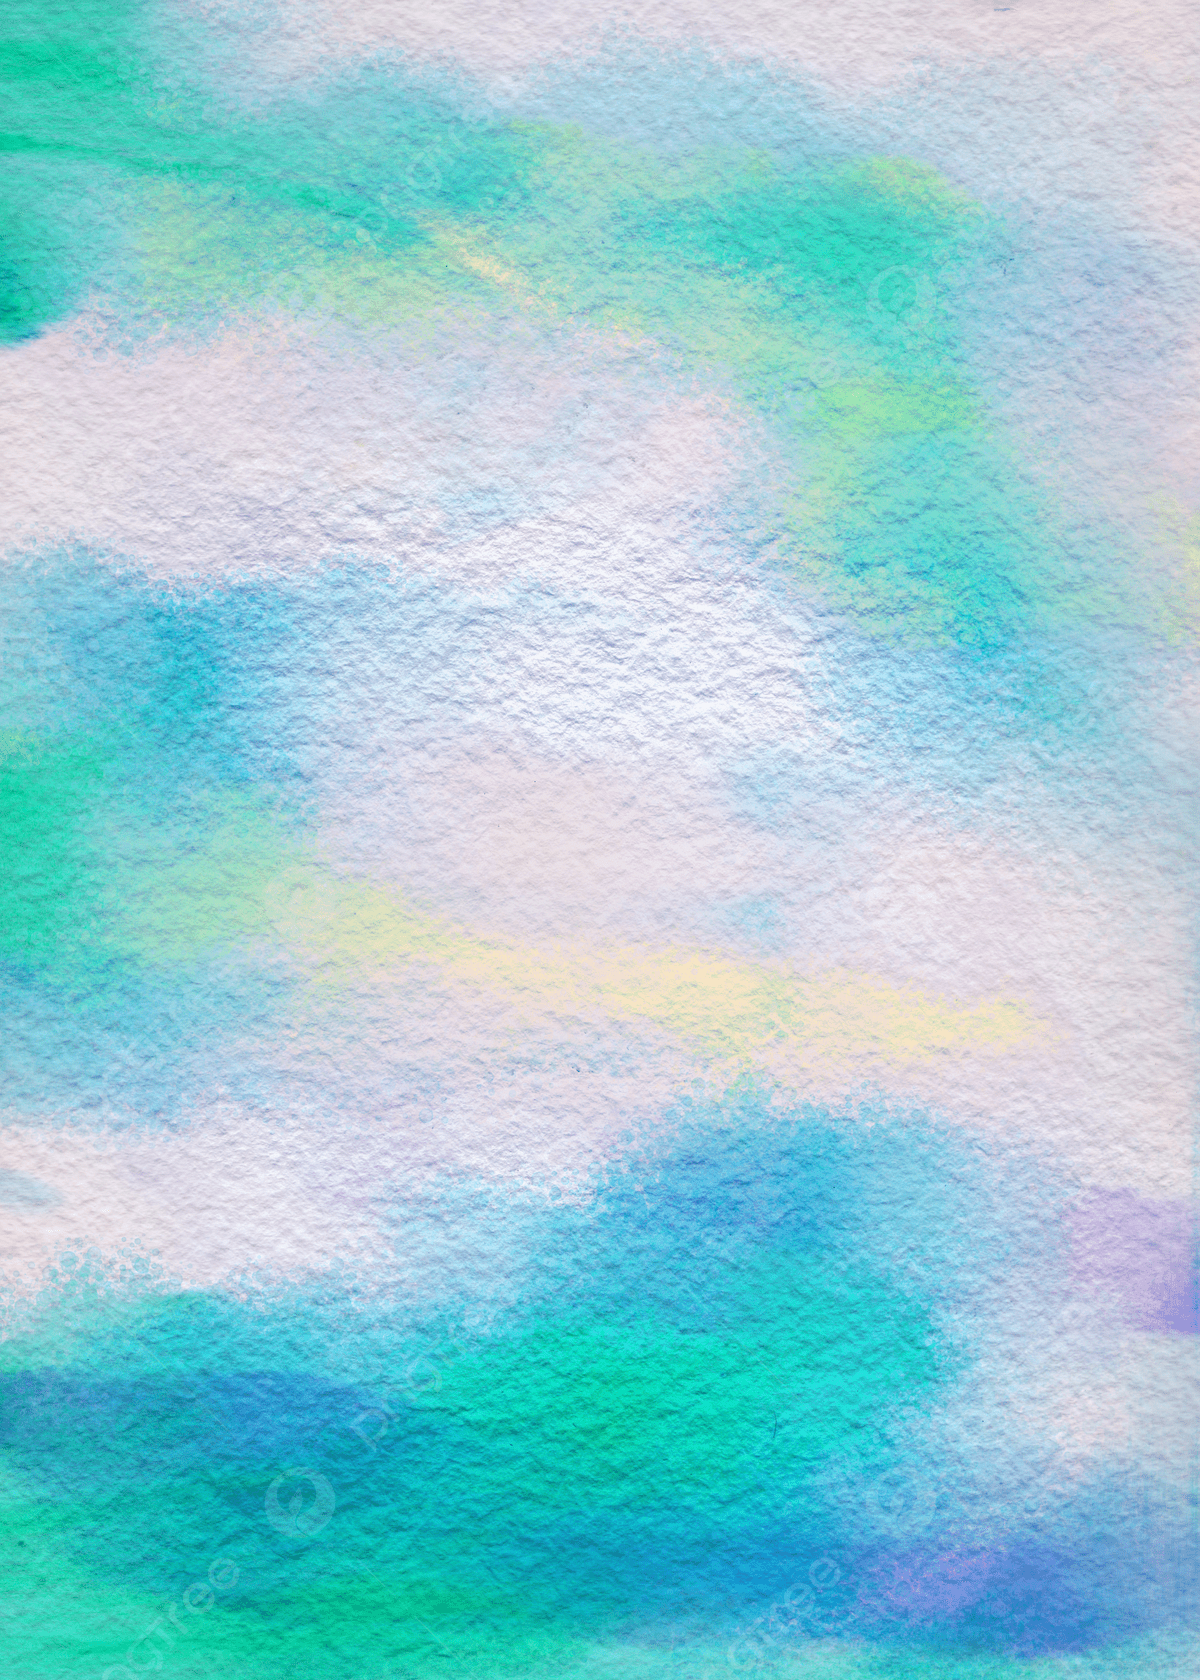 A watercolor painting with blue, green, and yellow colors. - Turquoise, watercolor